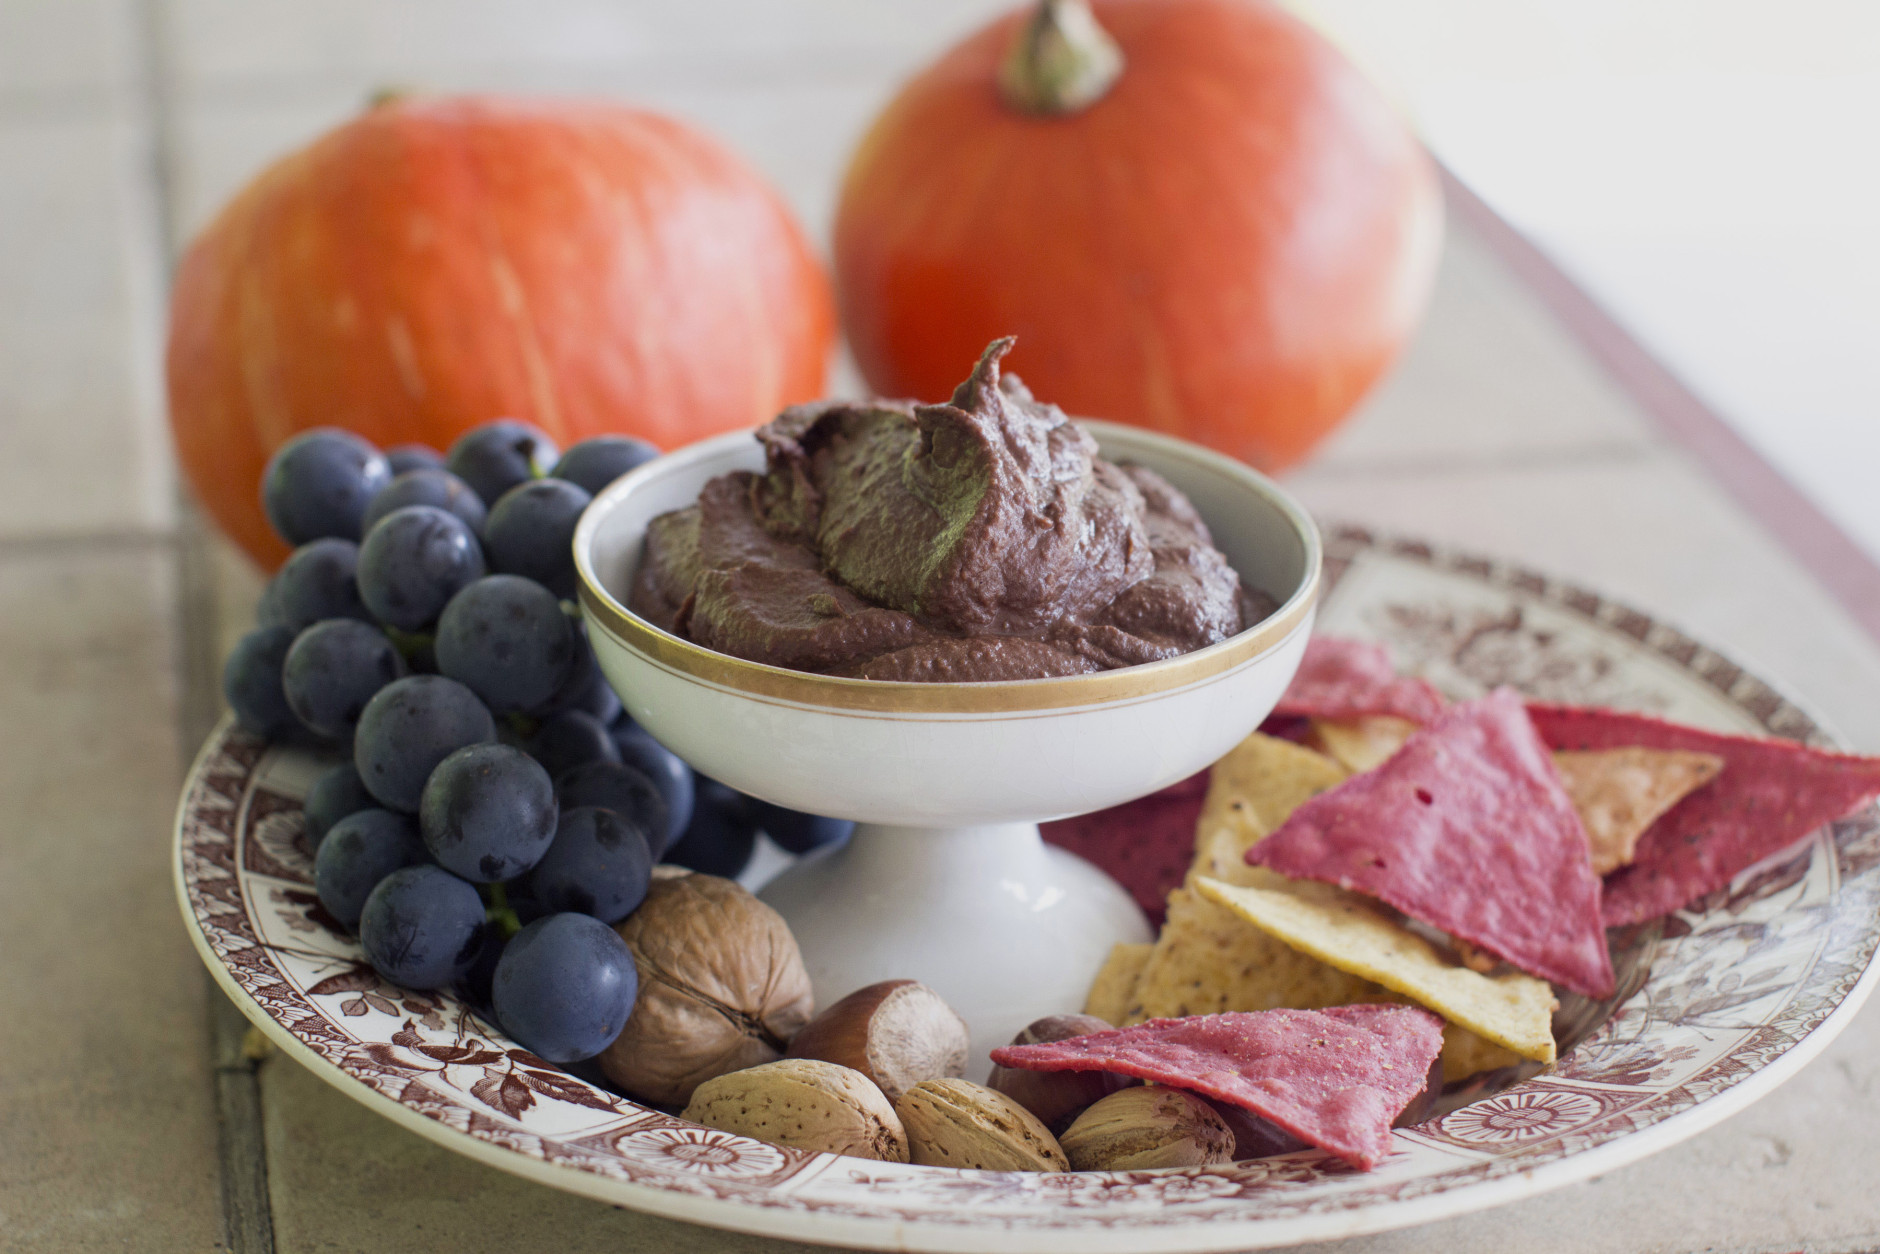 This Sept.  29, 2014, photo shows chocolate hummus in Concord, N.H. The hummus is rich, creamy and chocolatey, and thick enough to spread easily. Think of it as a slightly more textured Nutella, and every bit as sweet and delicious. (AP Photo/Matthew Mead)